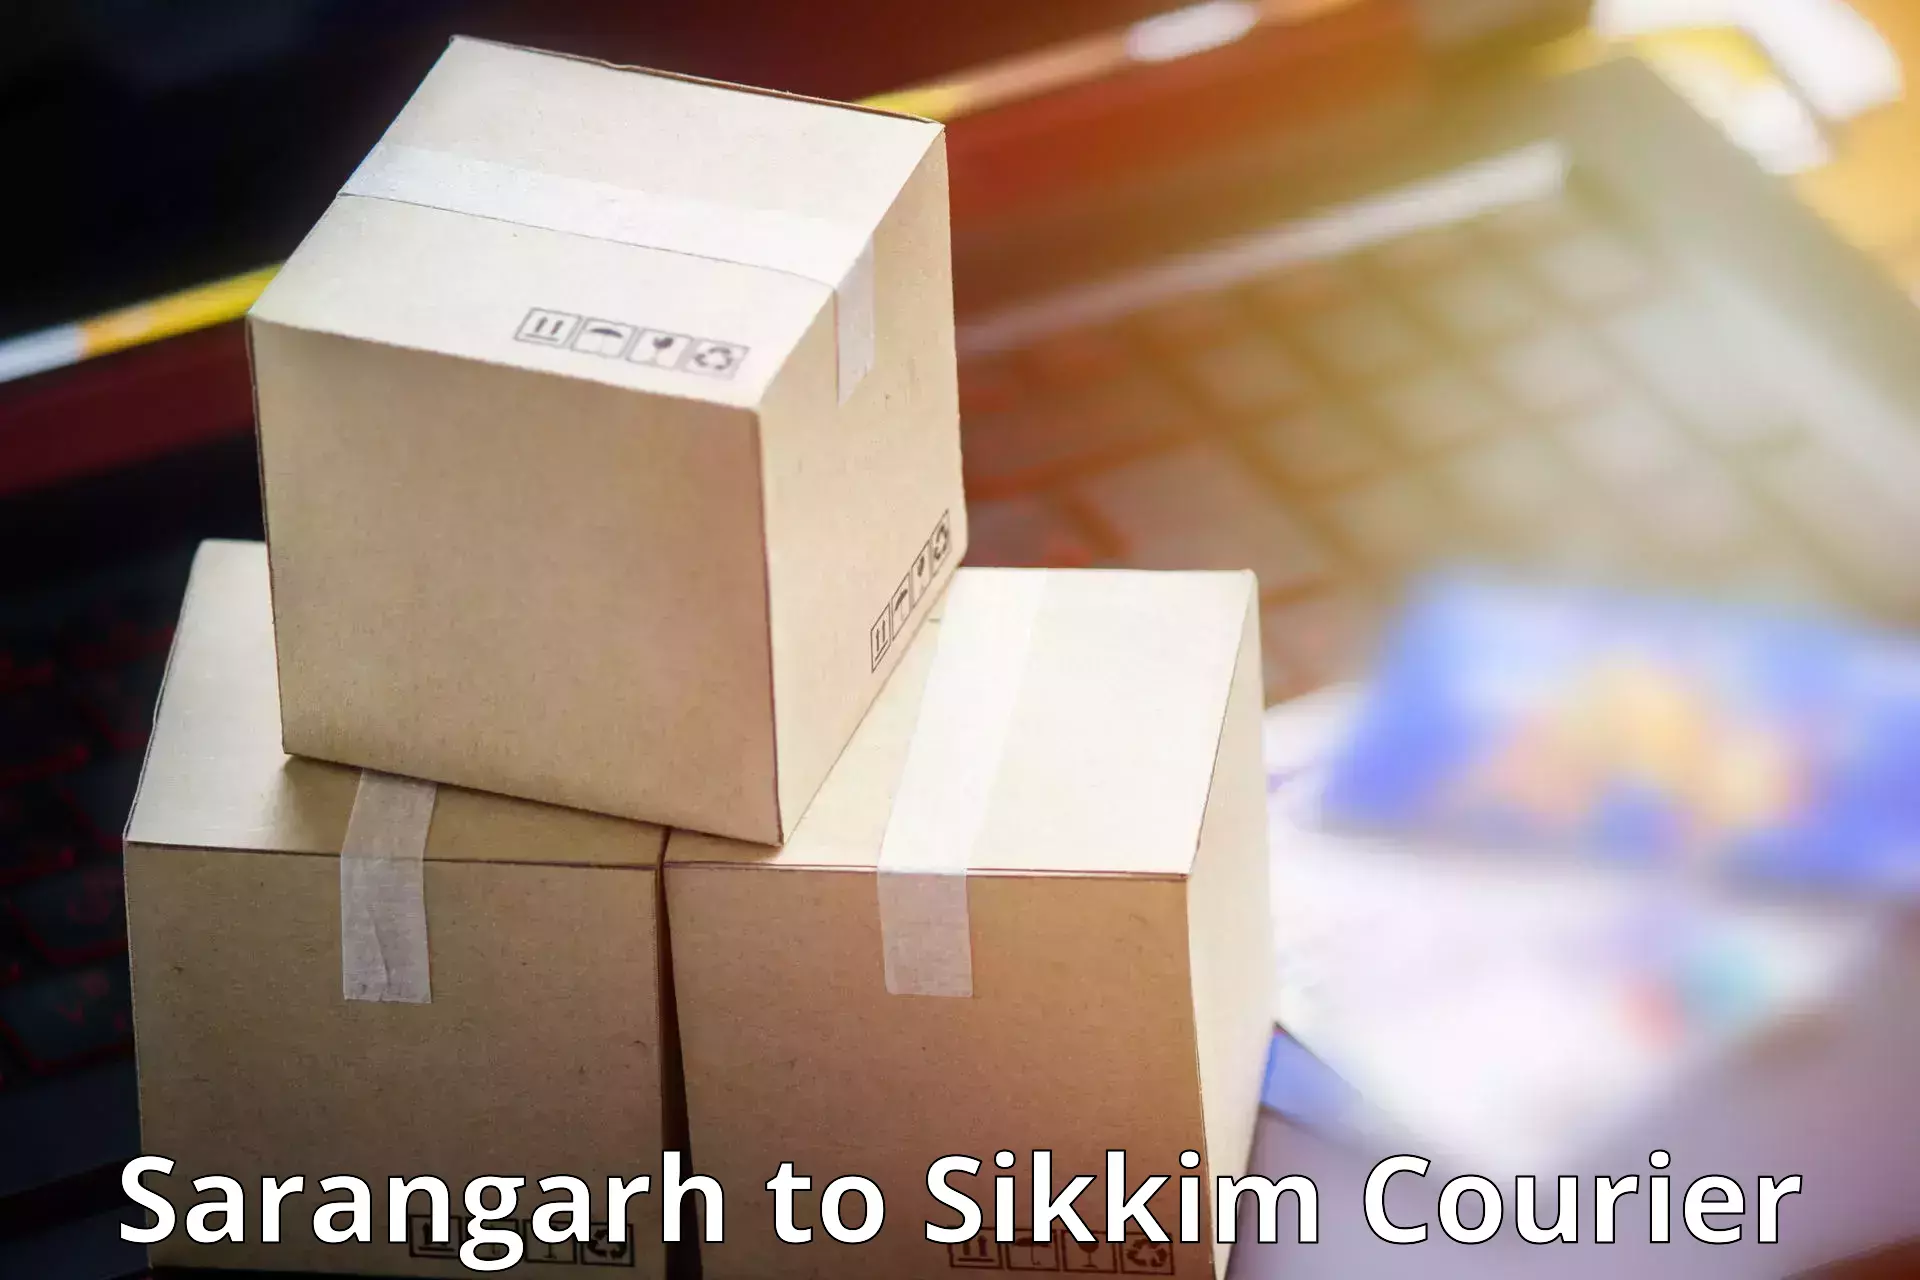 Global courier networks Sarangarh to North Sikkim